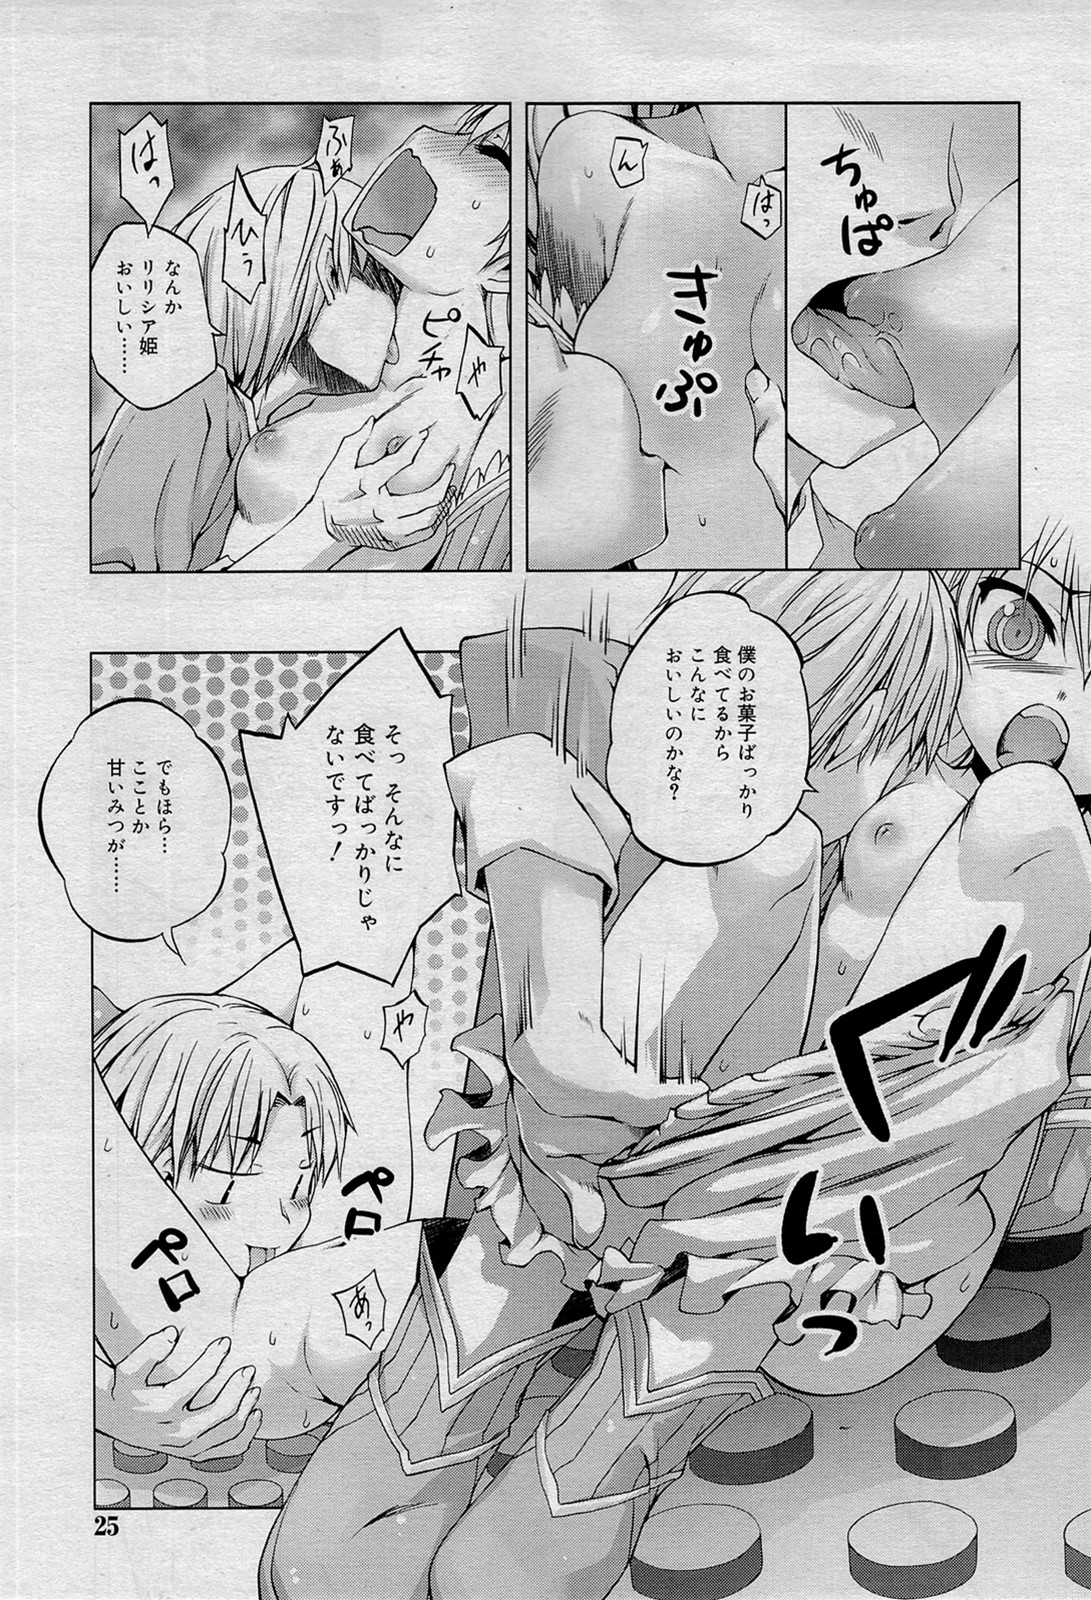 COMIC RiN 2012-01 page 25 full